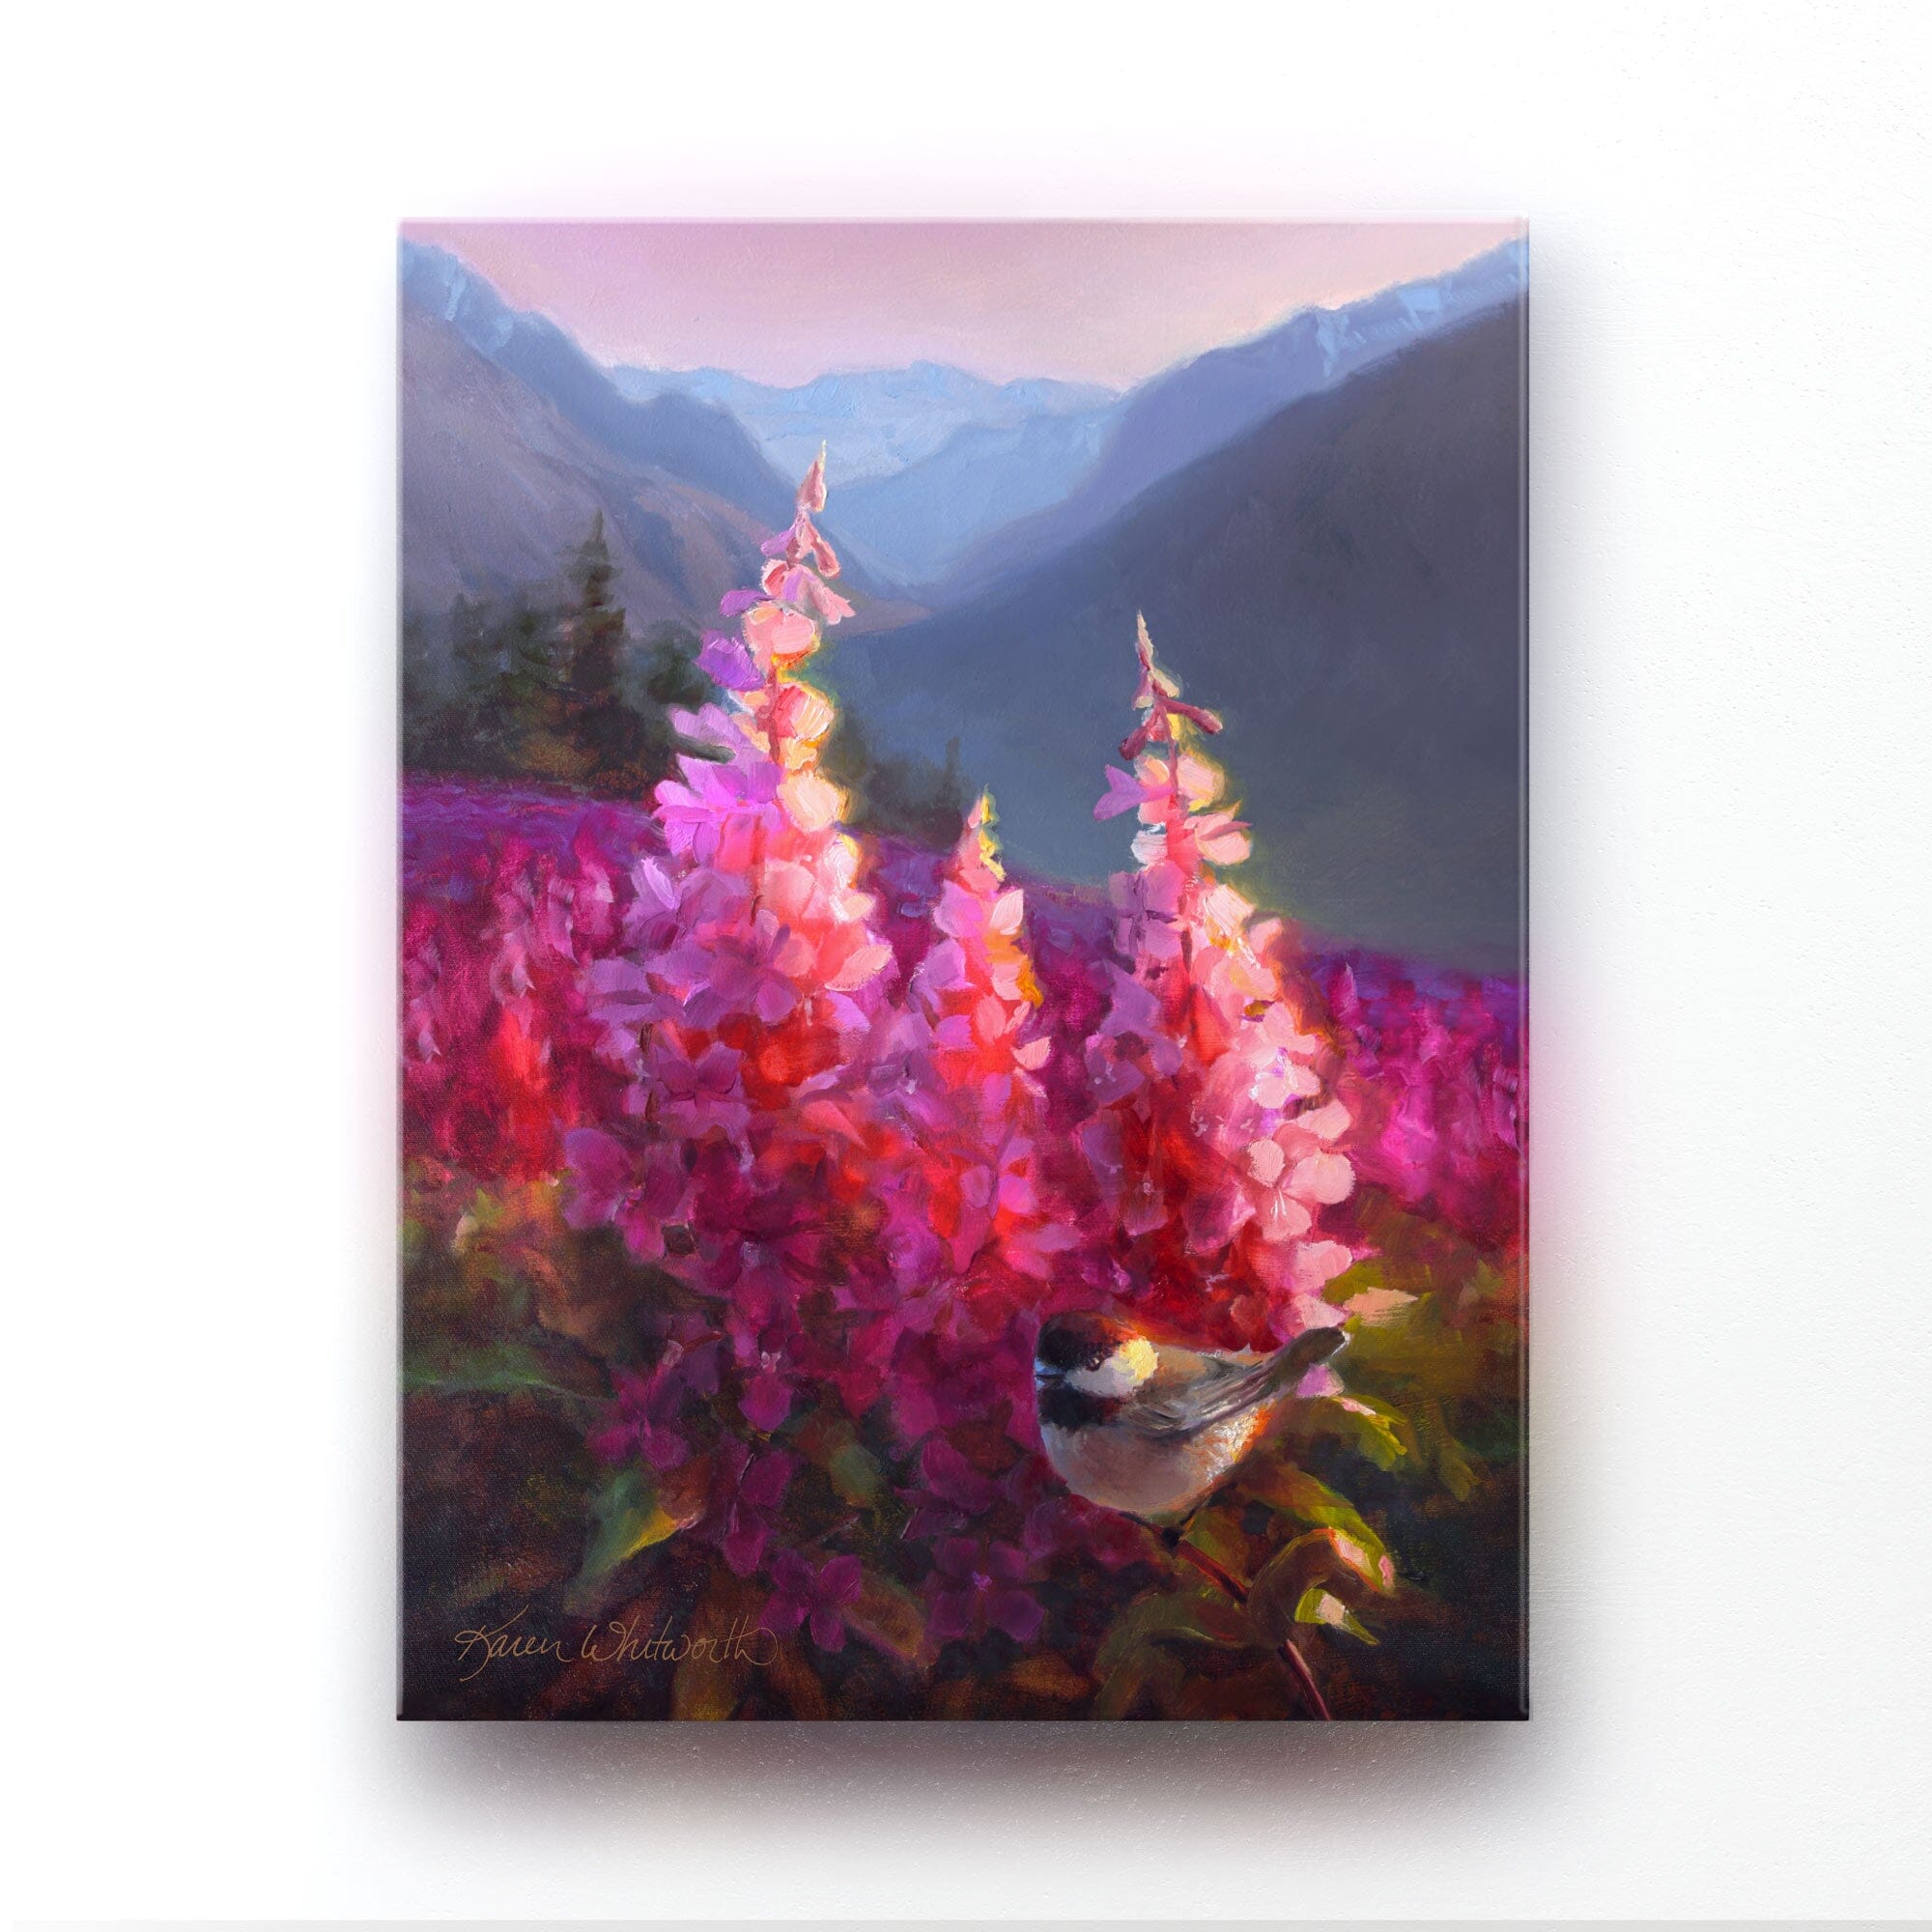 Alaska art on canvas of mountains with alpenglow on a meadow of fireweed flowers. This landscape painting is hanging on a white wall.